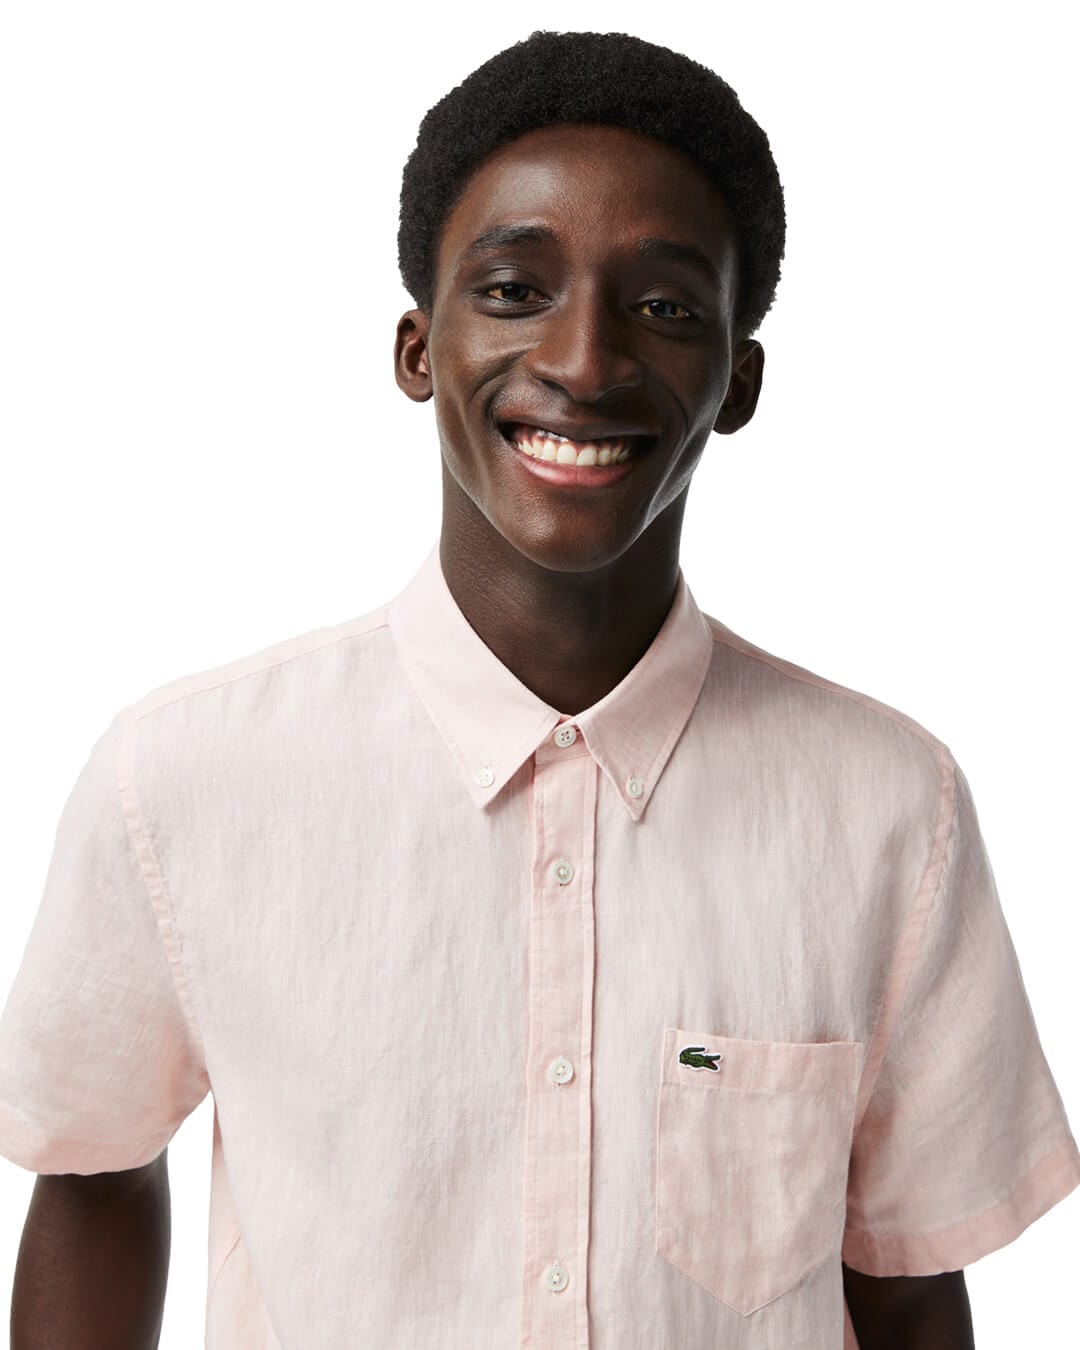 Lacoste Shirts Lacoste Short Sleeved Pink Linen Shirt